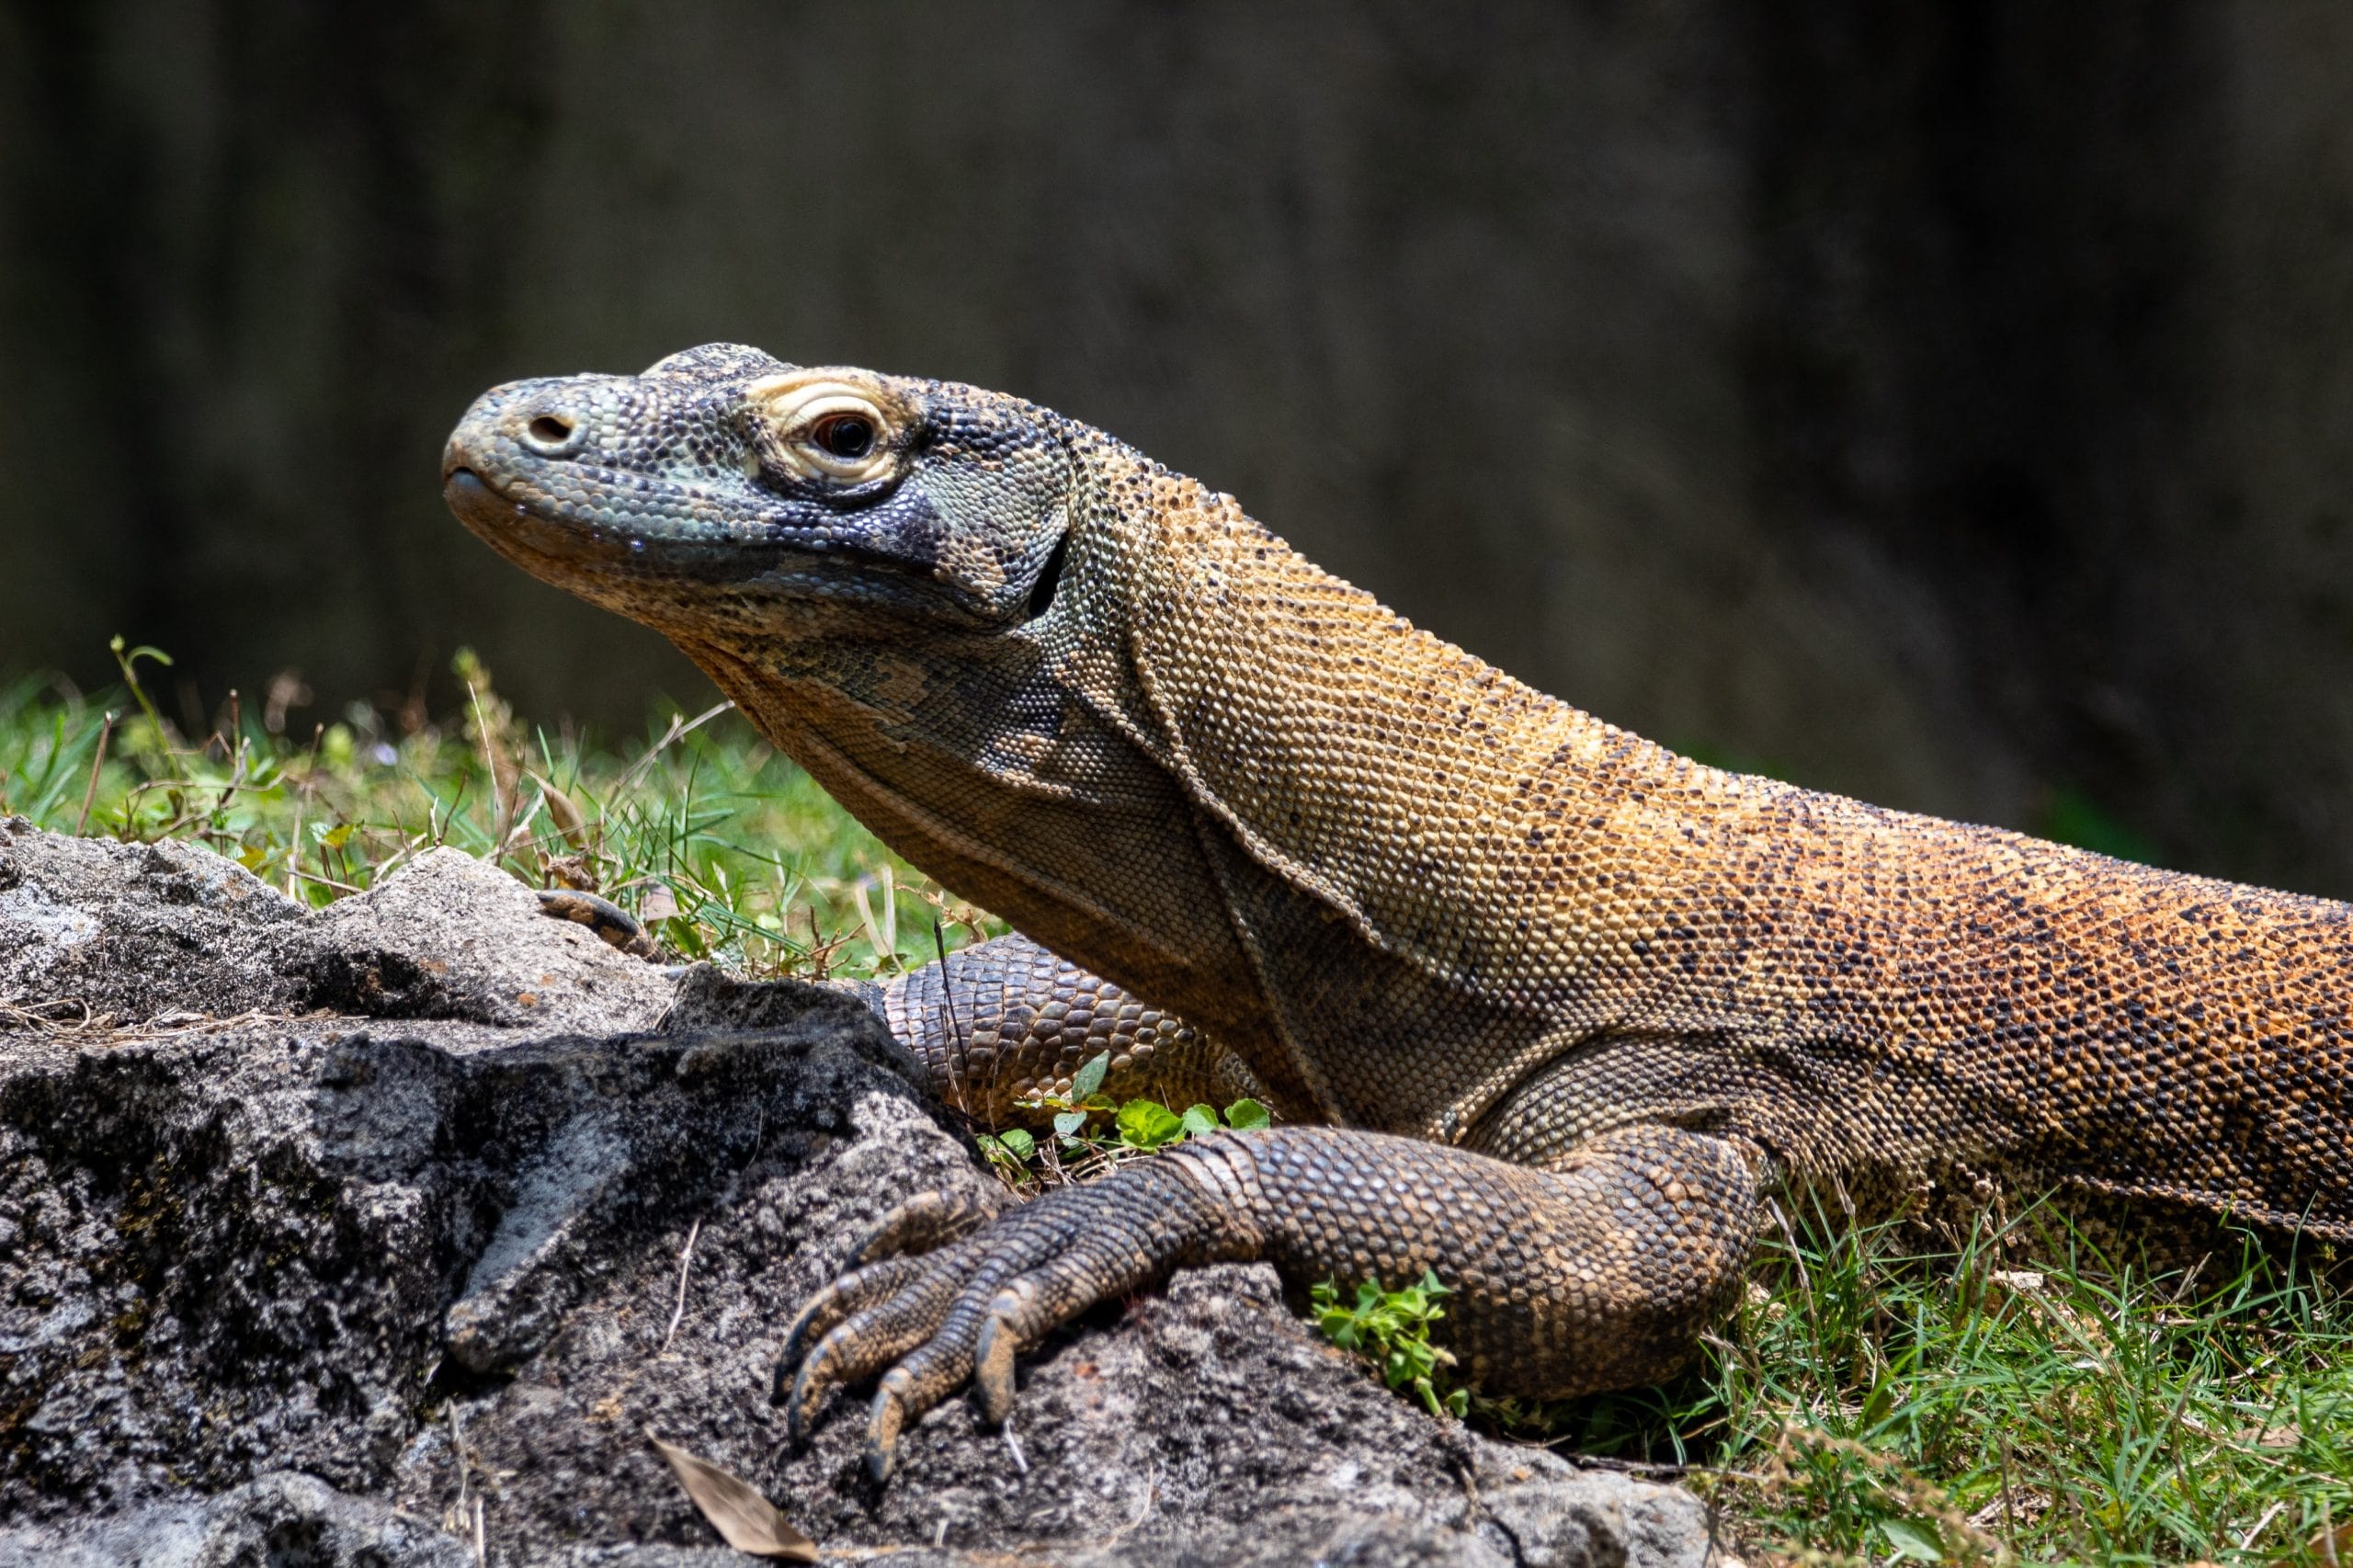 Indonesia considers the largest lizard in the world to be one of its national symbols. What is its name?